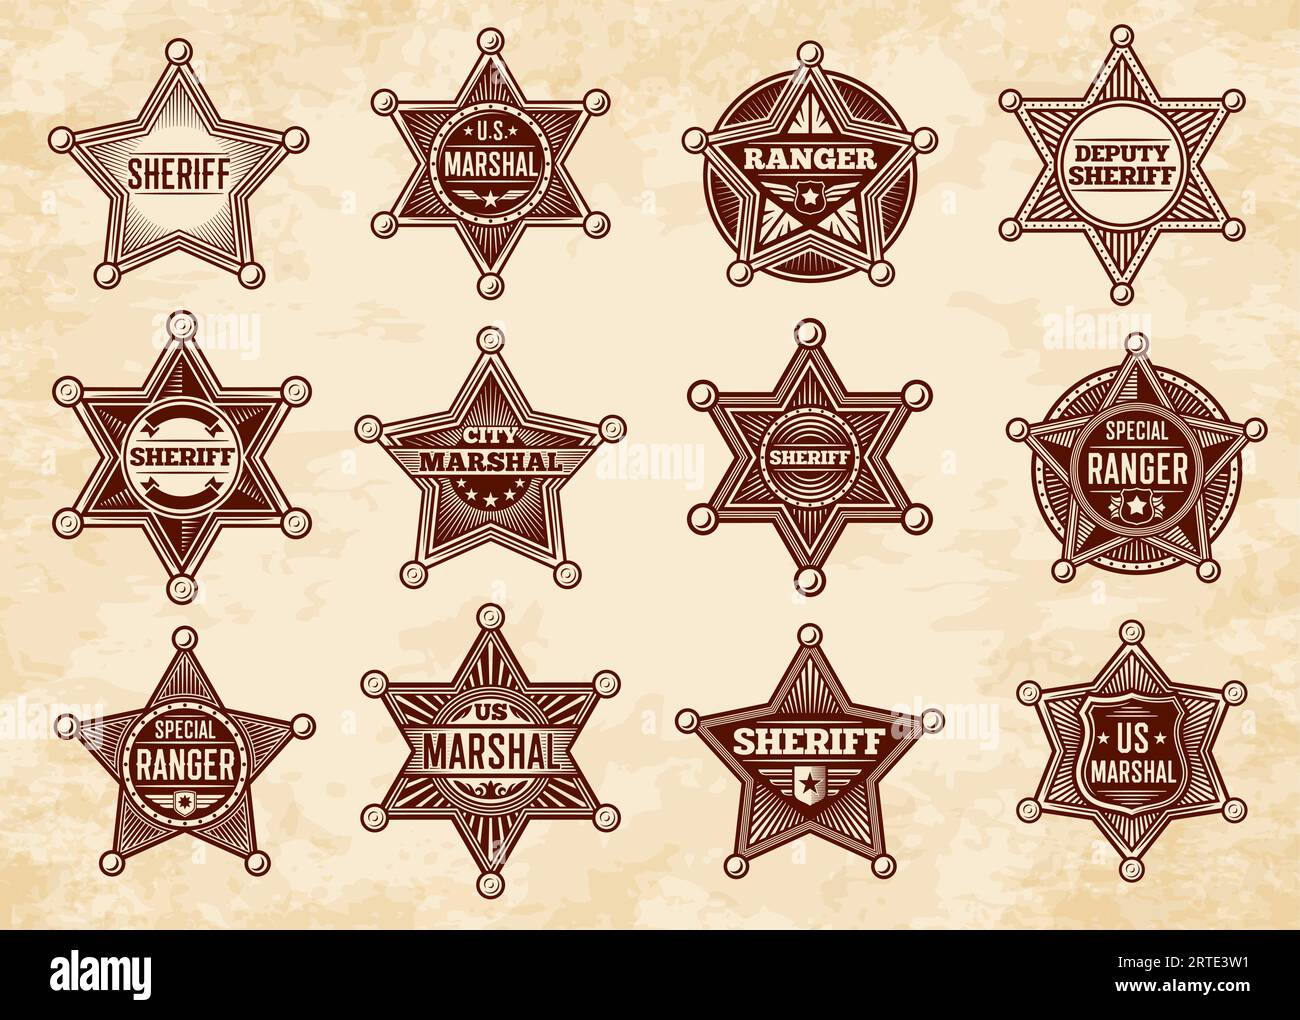 Sheriff, marshal and ranger stars, vector badges. Wild West Us police vintage insignias. Graphic design elements, american lawman signs on paper texture background, five or six pointed stars set Stock Vector